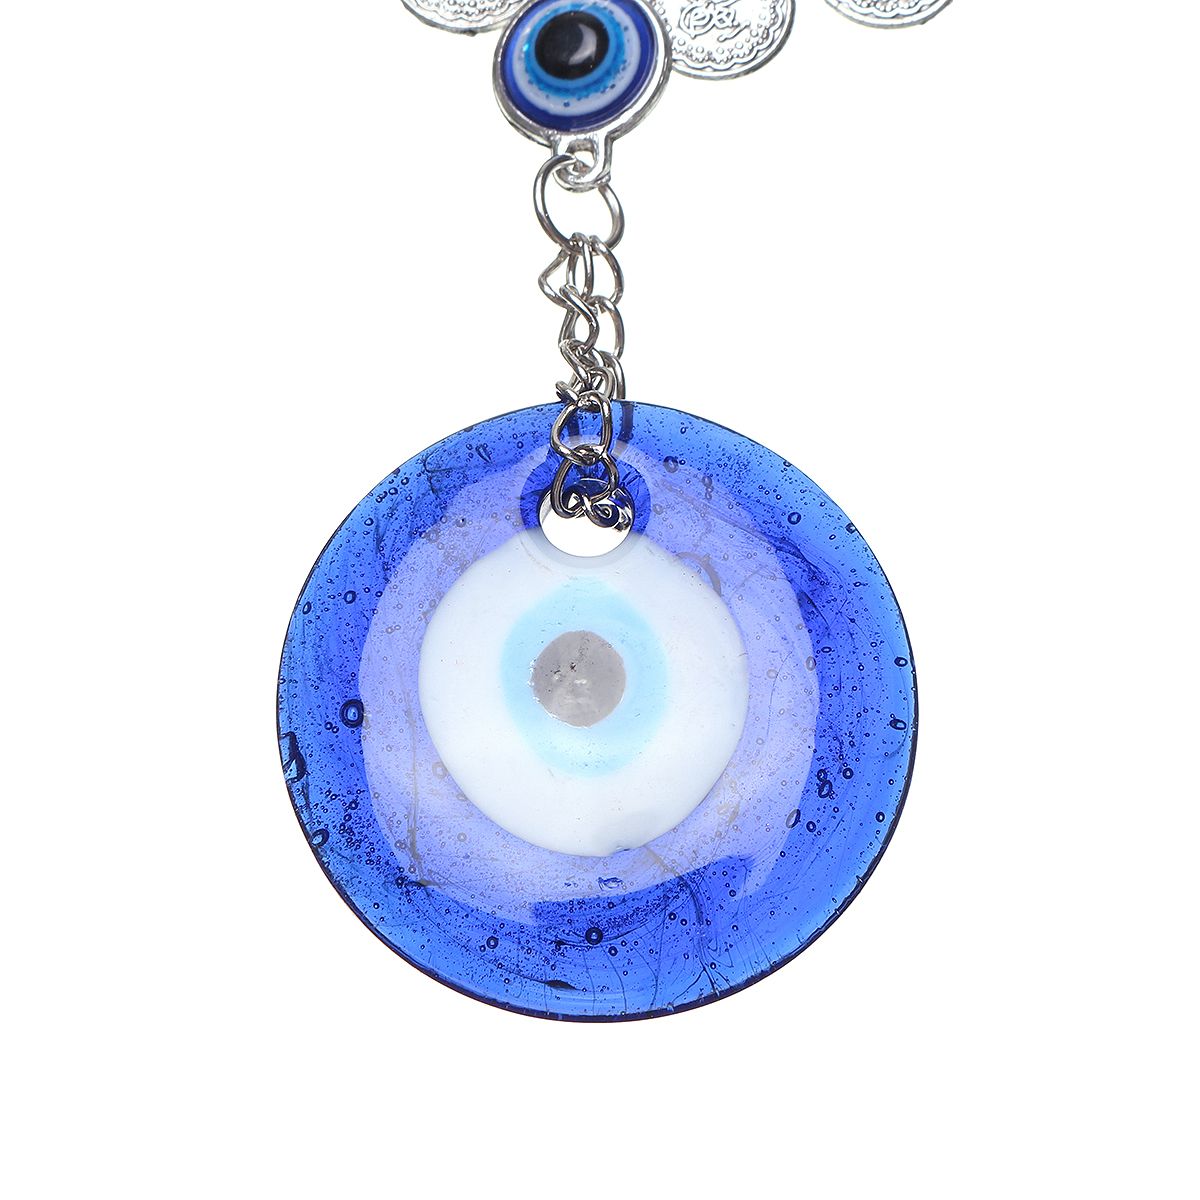 Turkish-Blue-Glass-Evil-Eye-Amulet-Wall-Hanging-Pendants-Home-Decorations-Lucky-Protection-1499024